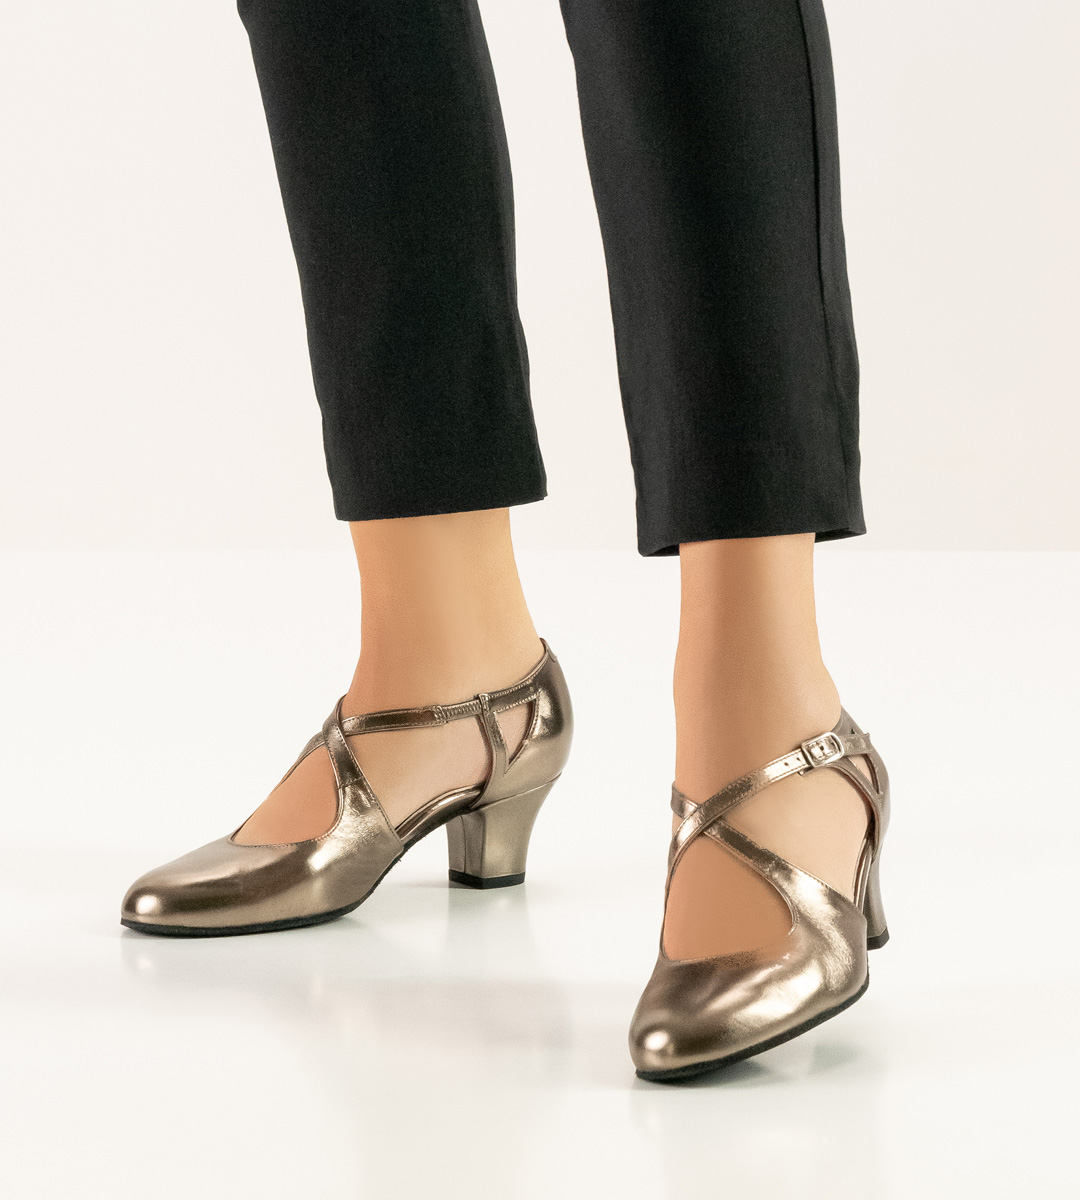 Werner Kern ladies' dance shoe in soft nappa leather combined with black trousers